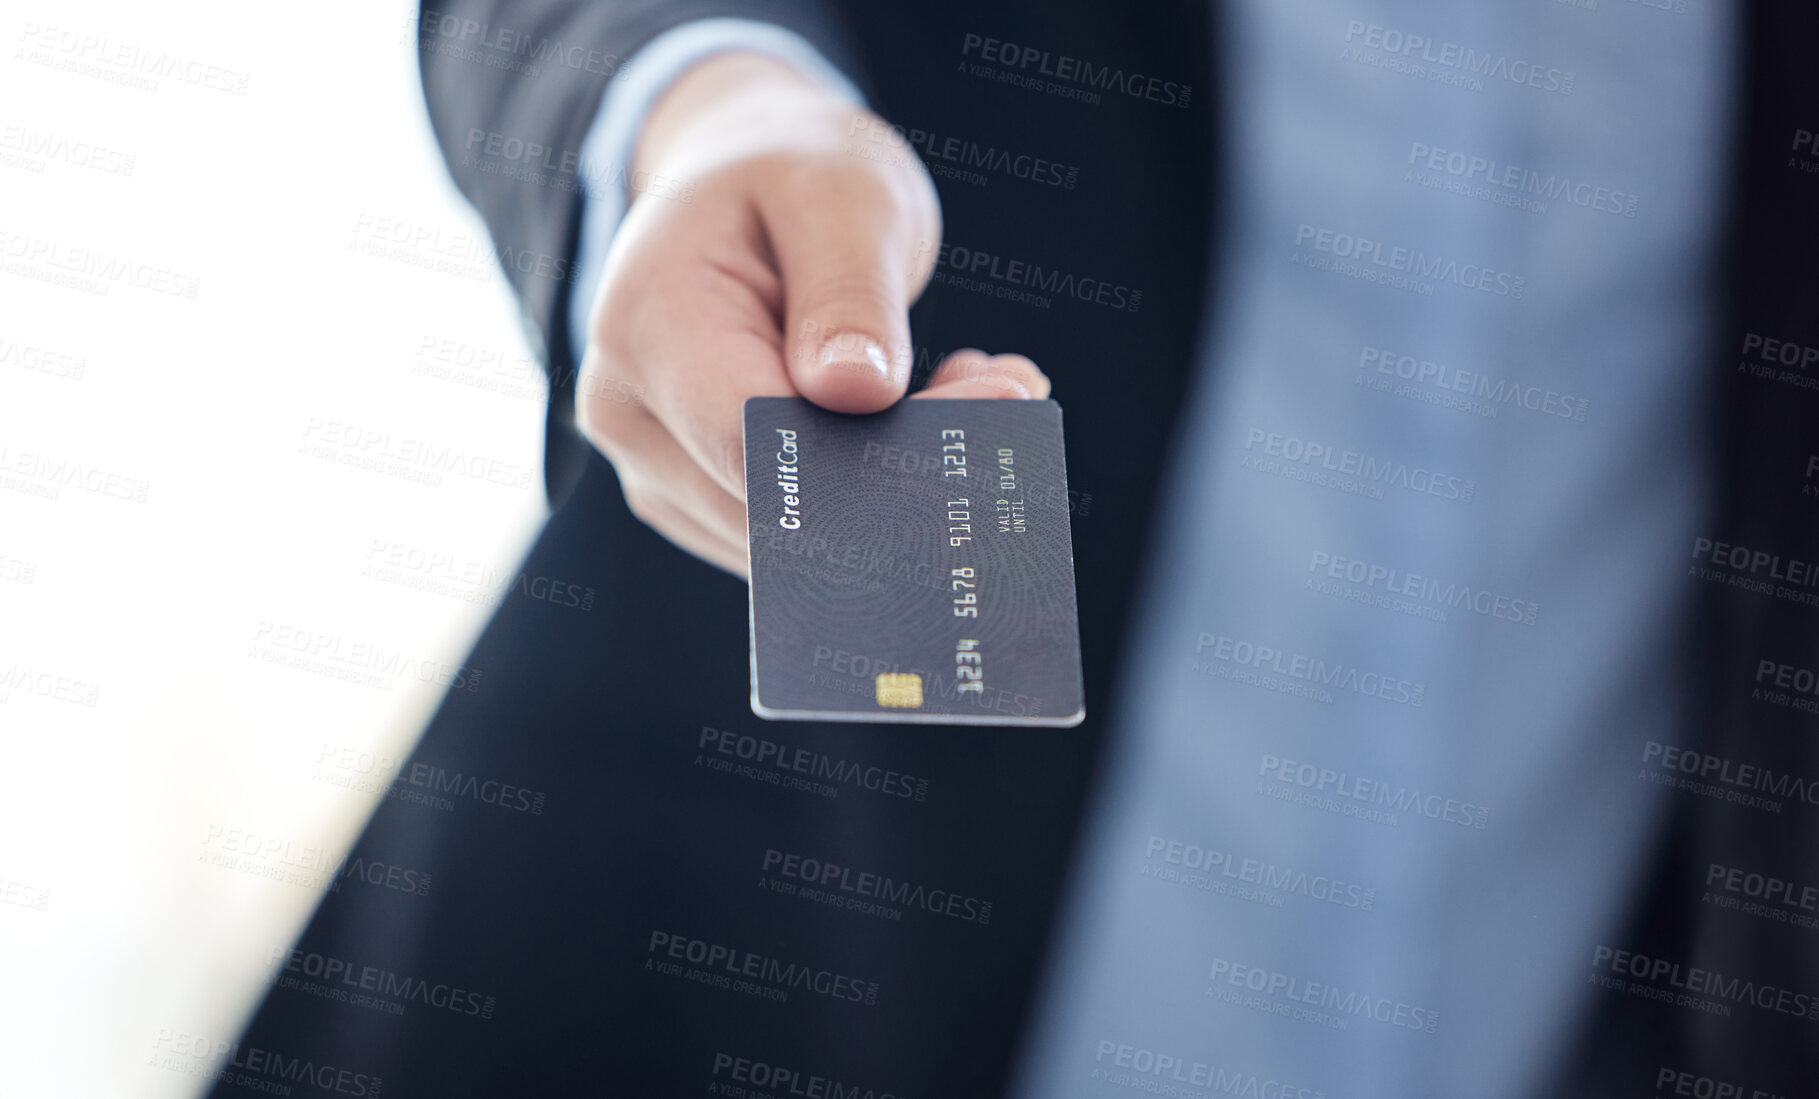 Buy stock photo Shot of an unrecognizable businesswoman holding a credit card at work